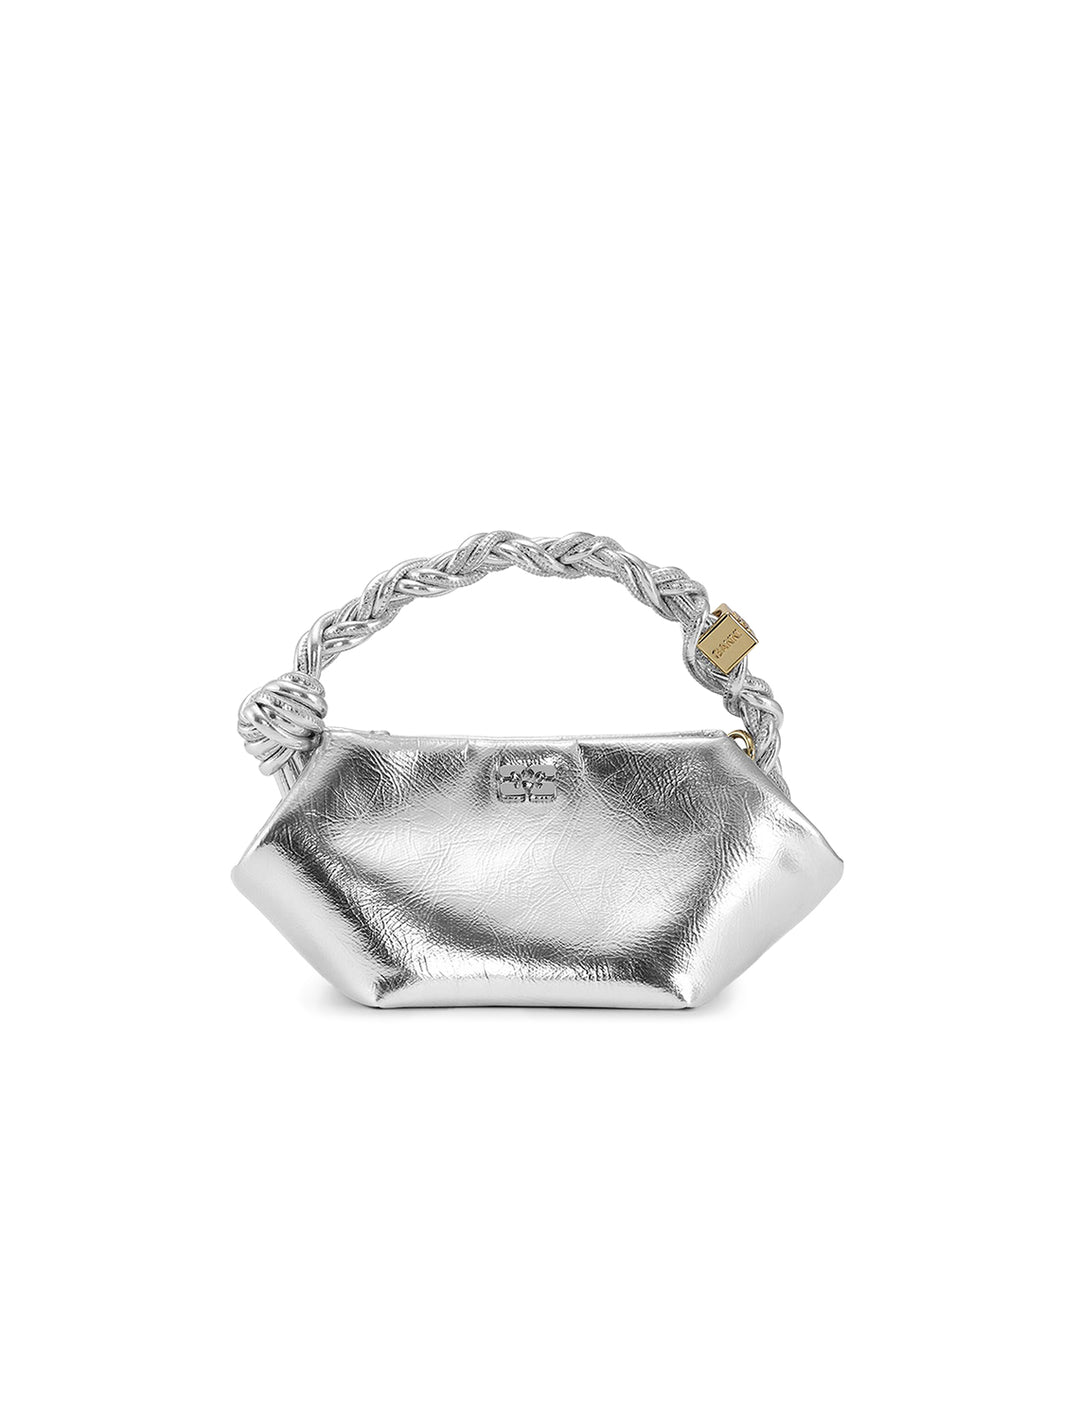 Front view of GANNI's mini bou bag in silver.